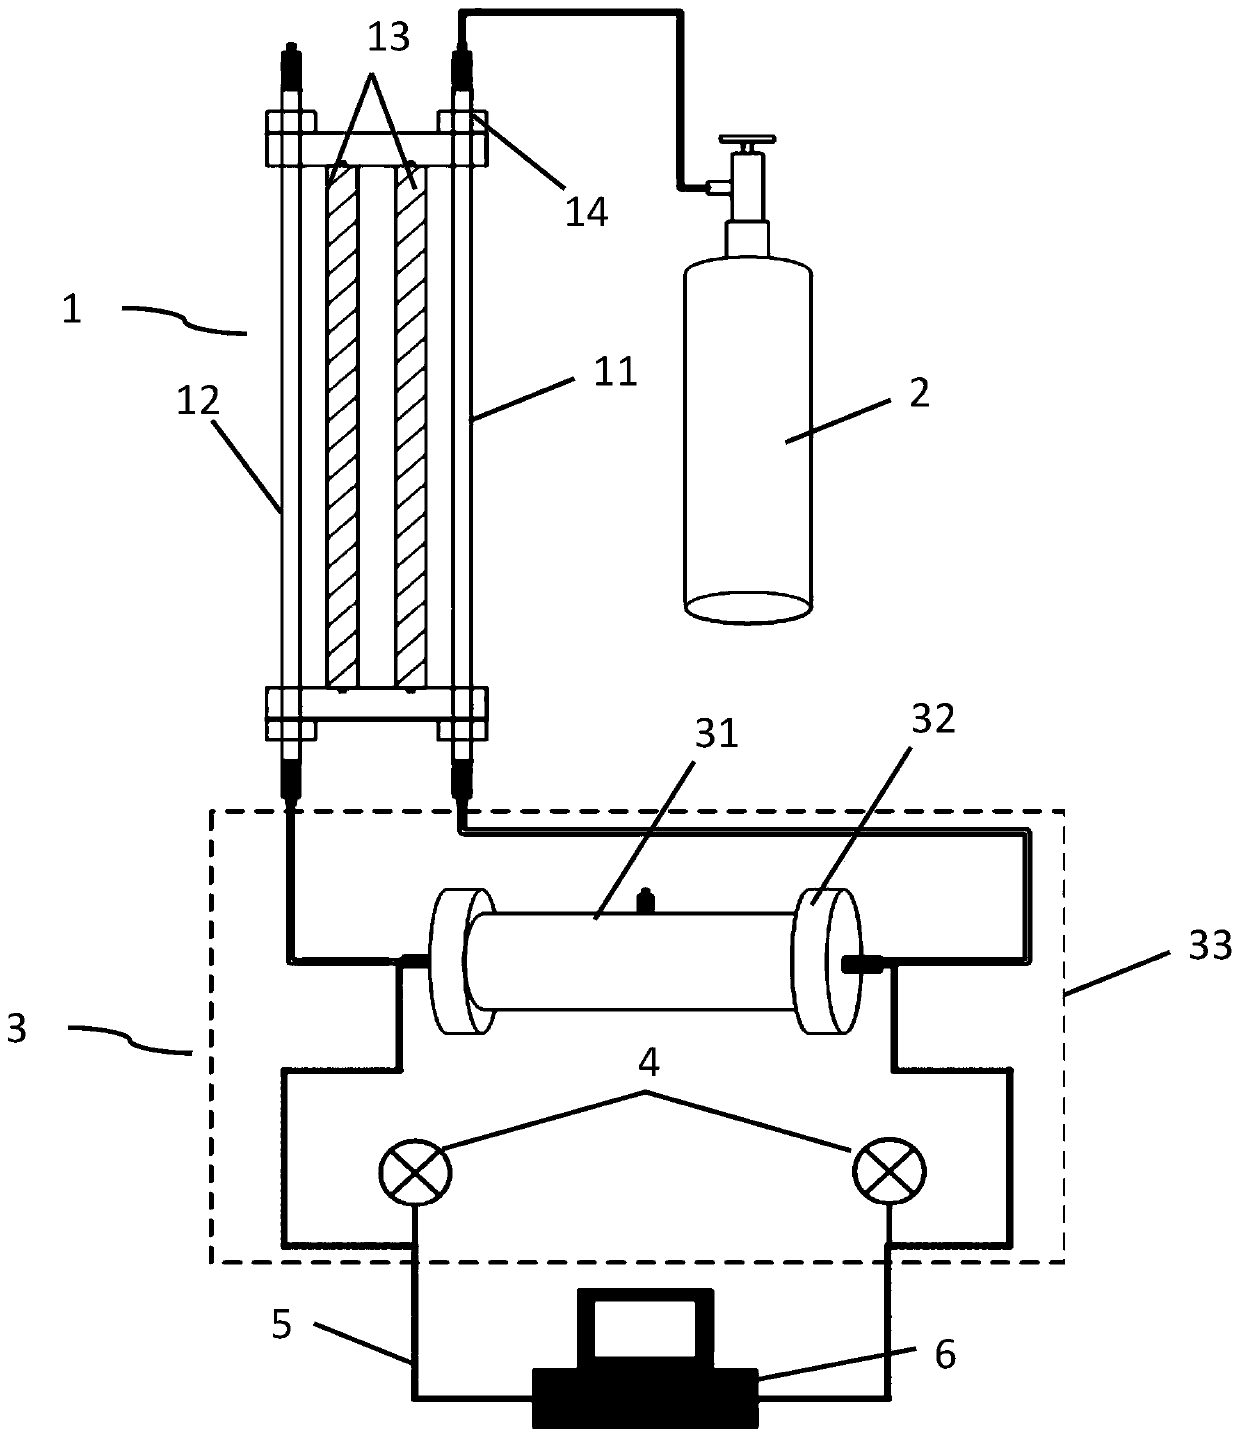 A device and method for measuring the start-up pressure gradient of fluid flow in polymer flooding reservoirs